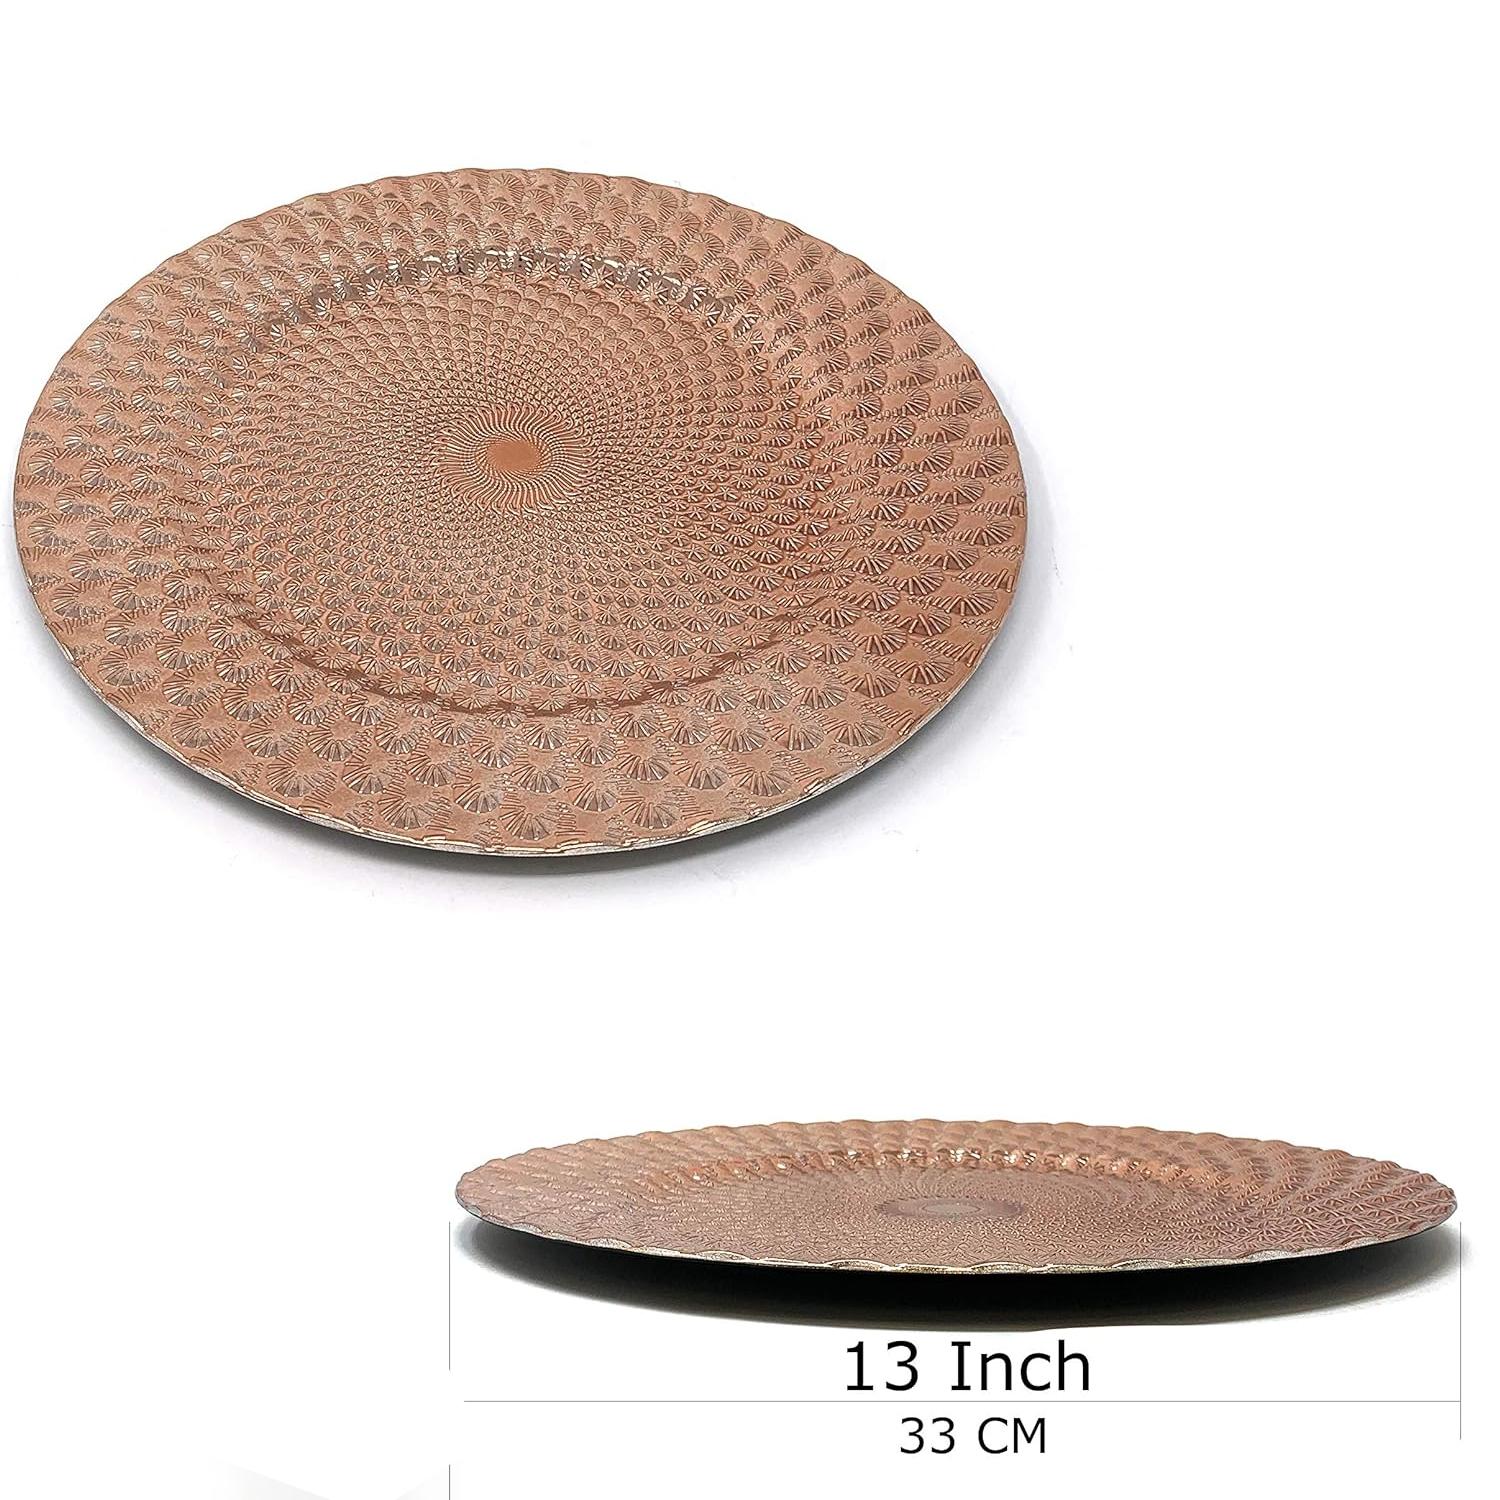 BRONZE CHARGER PLATE 33CM